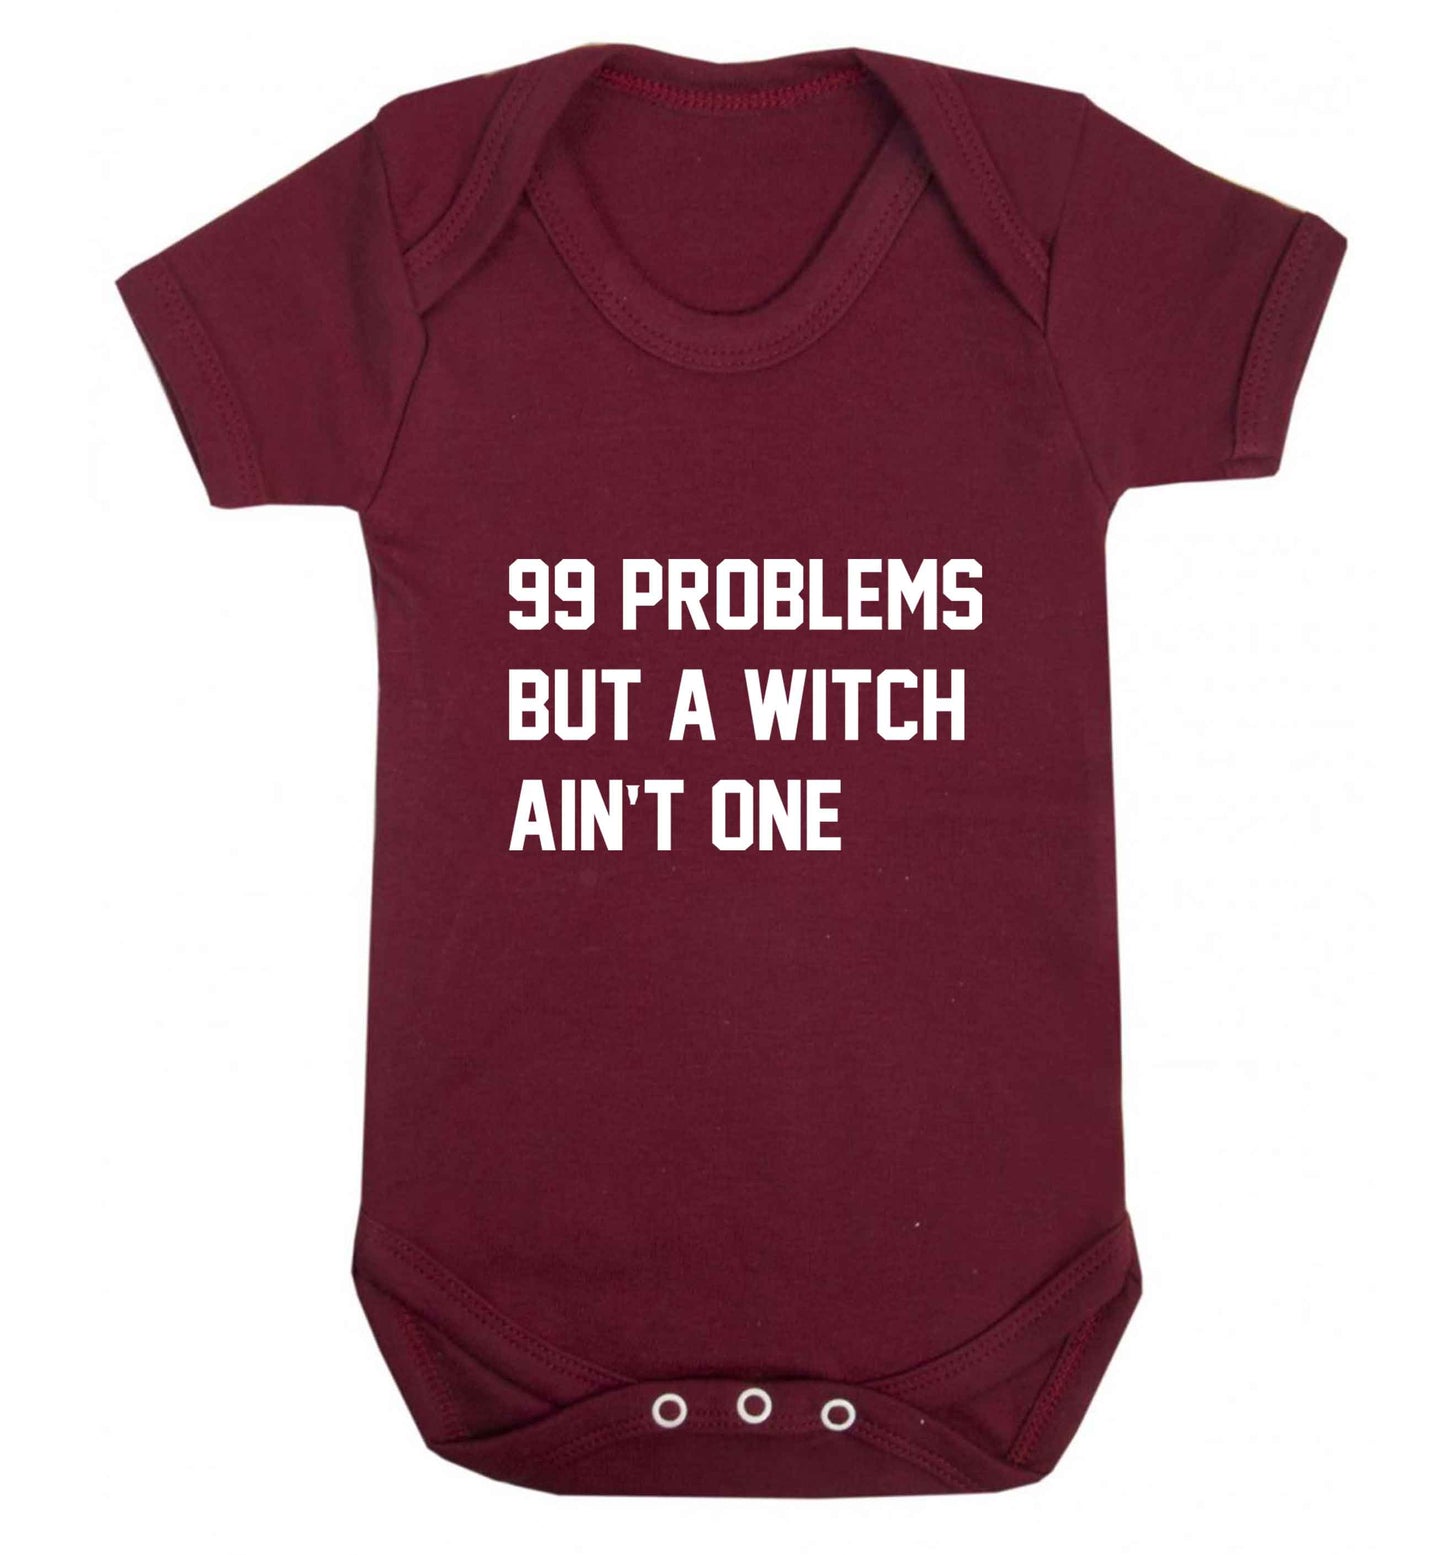 99 Problems but a witch aint one baby vest maroon 18-24 months